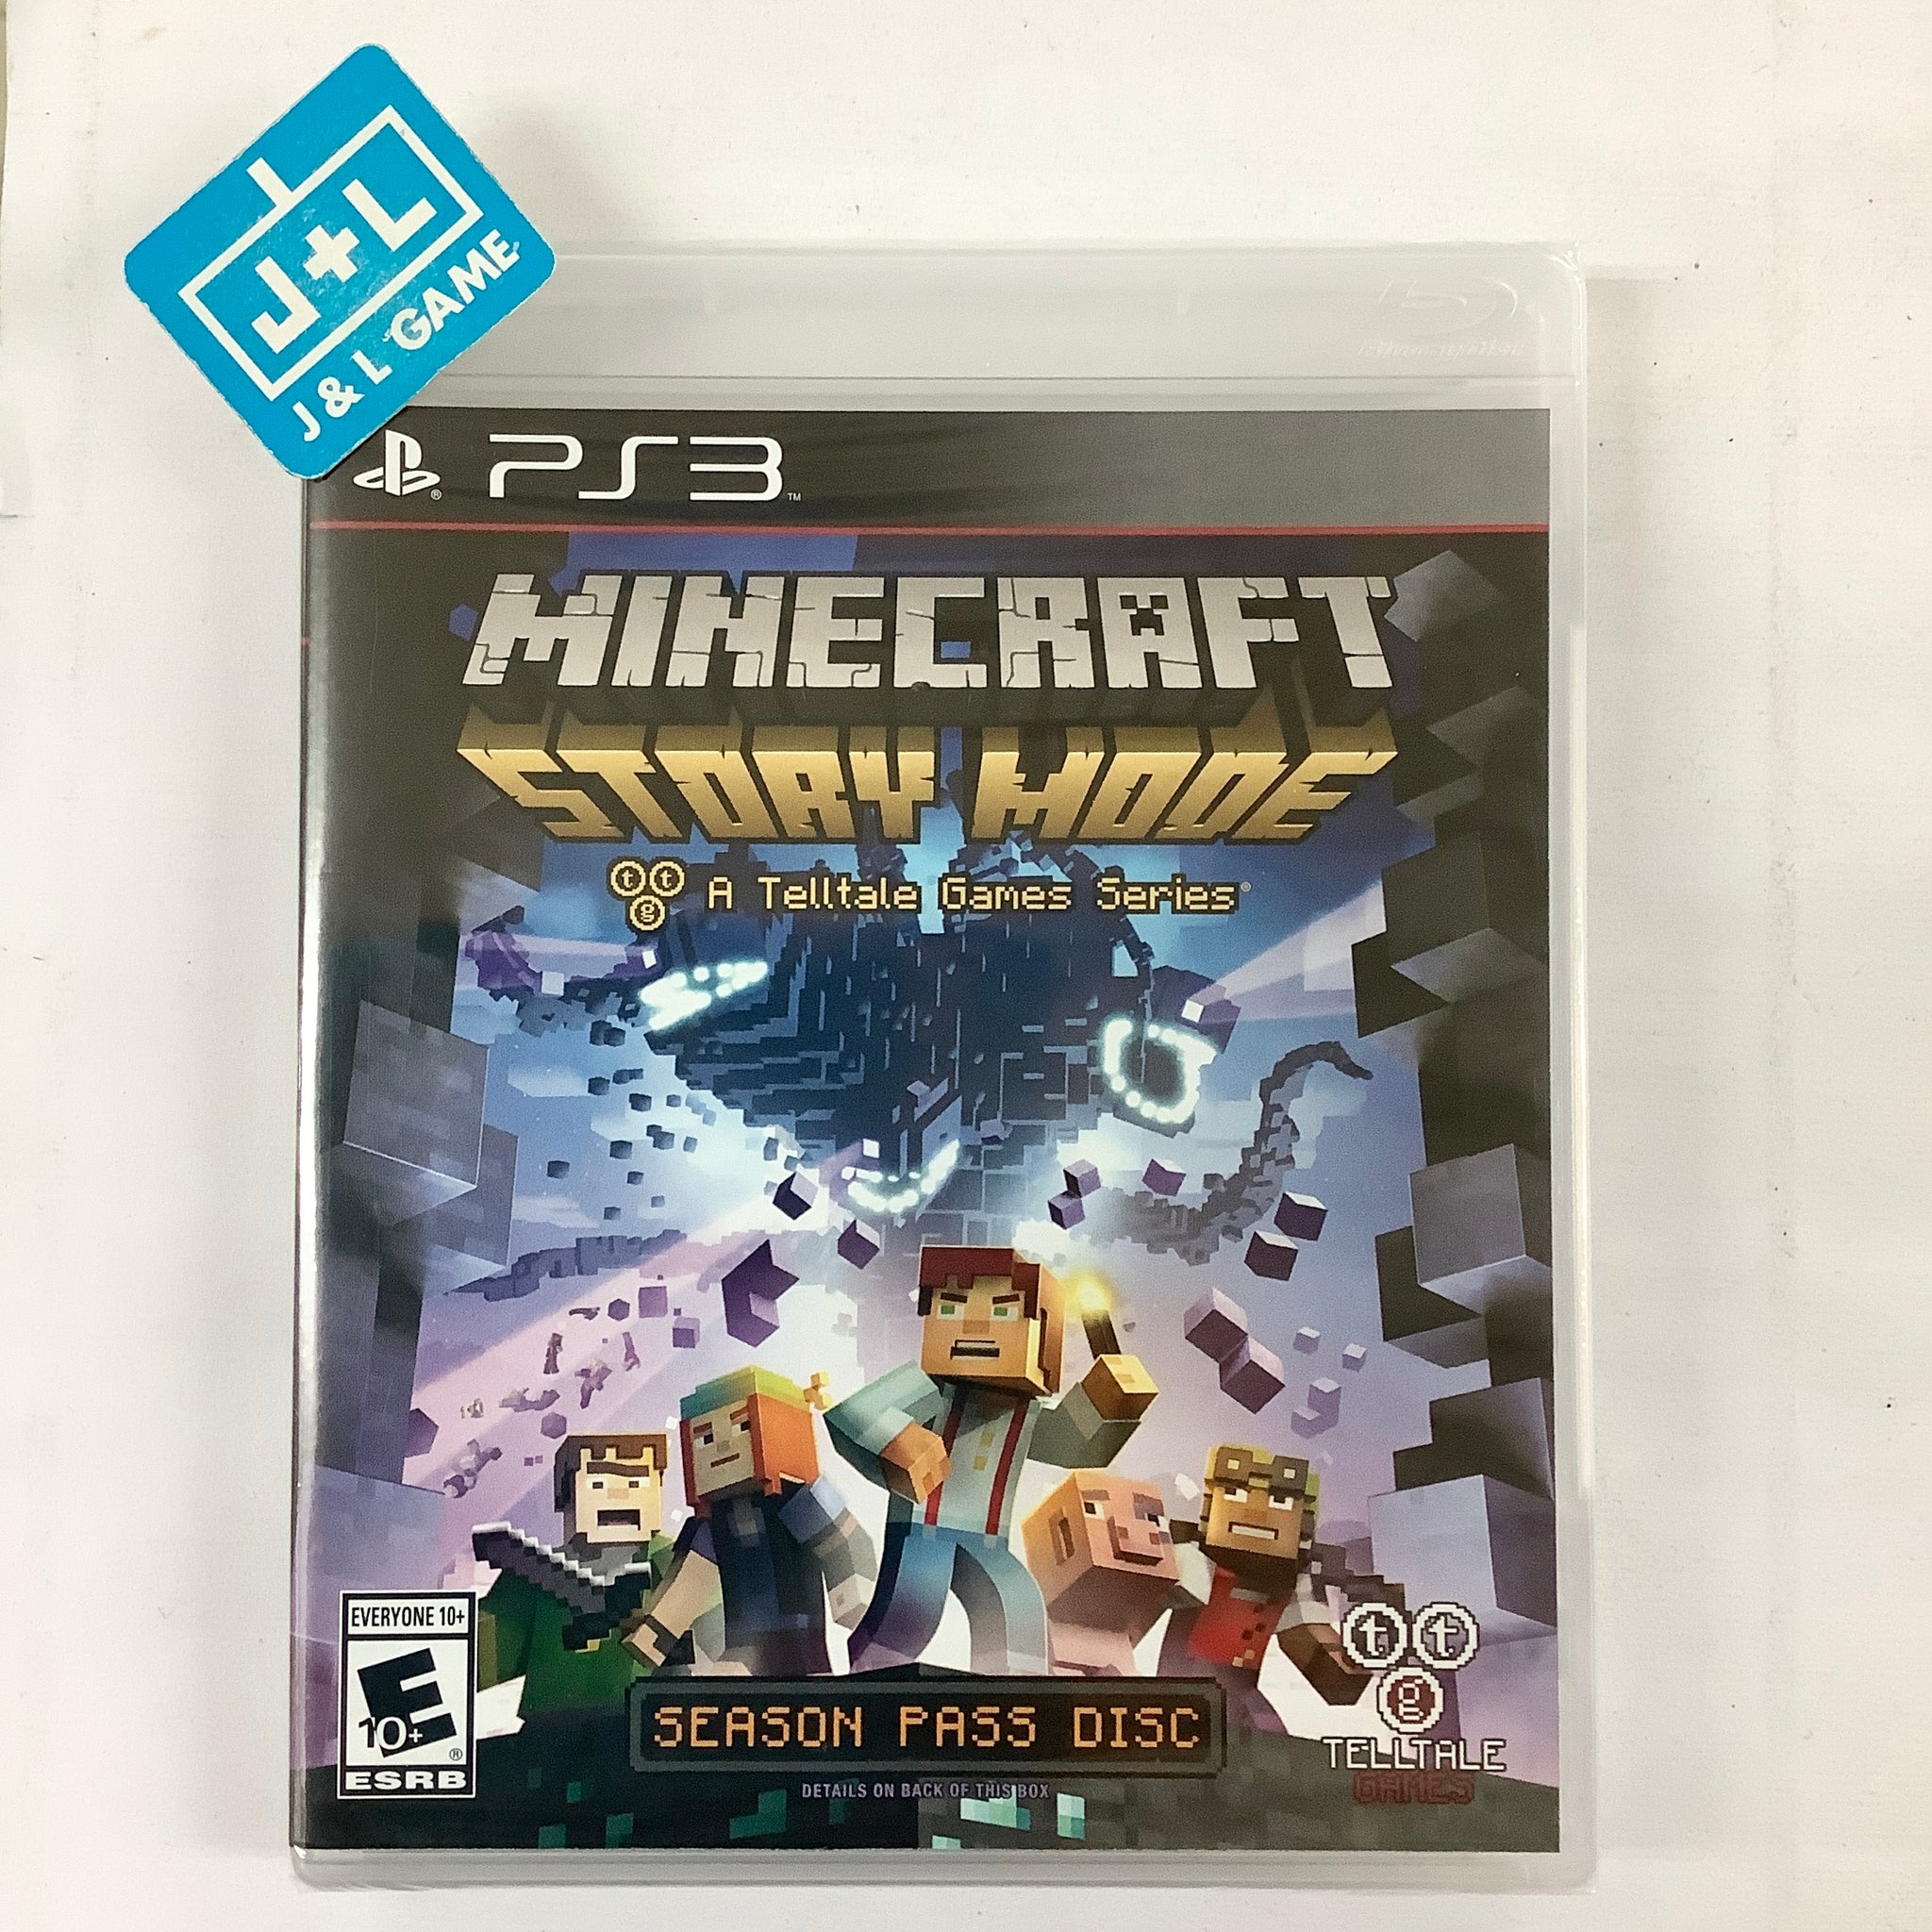 Minecraft: PlayStation 3 Edition (PS3) News and Videos